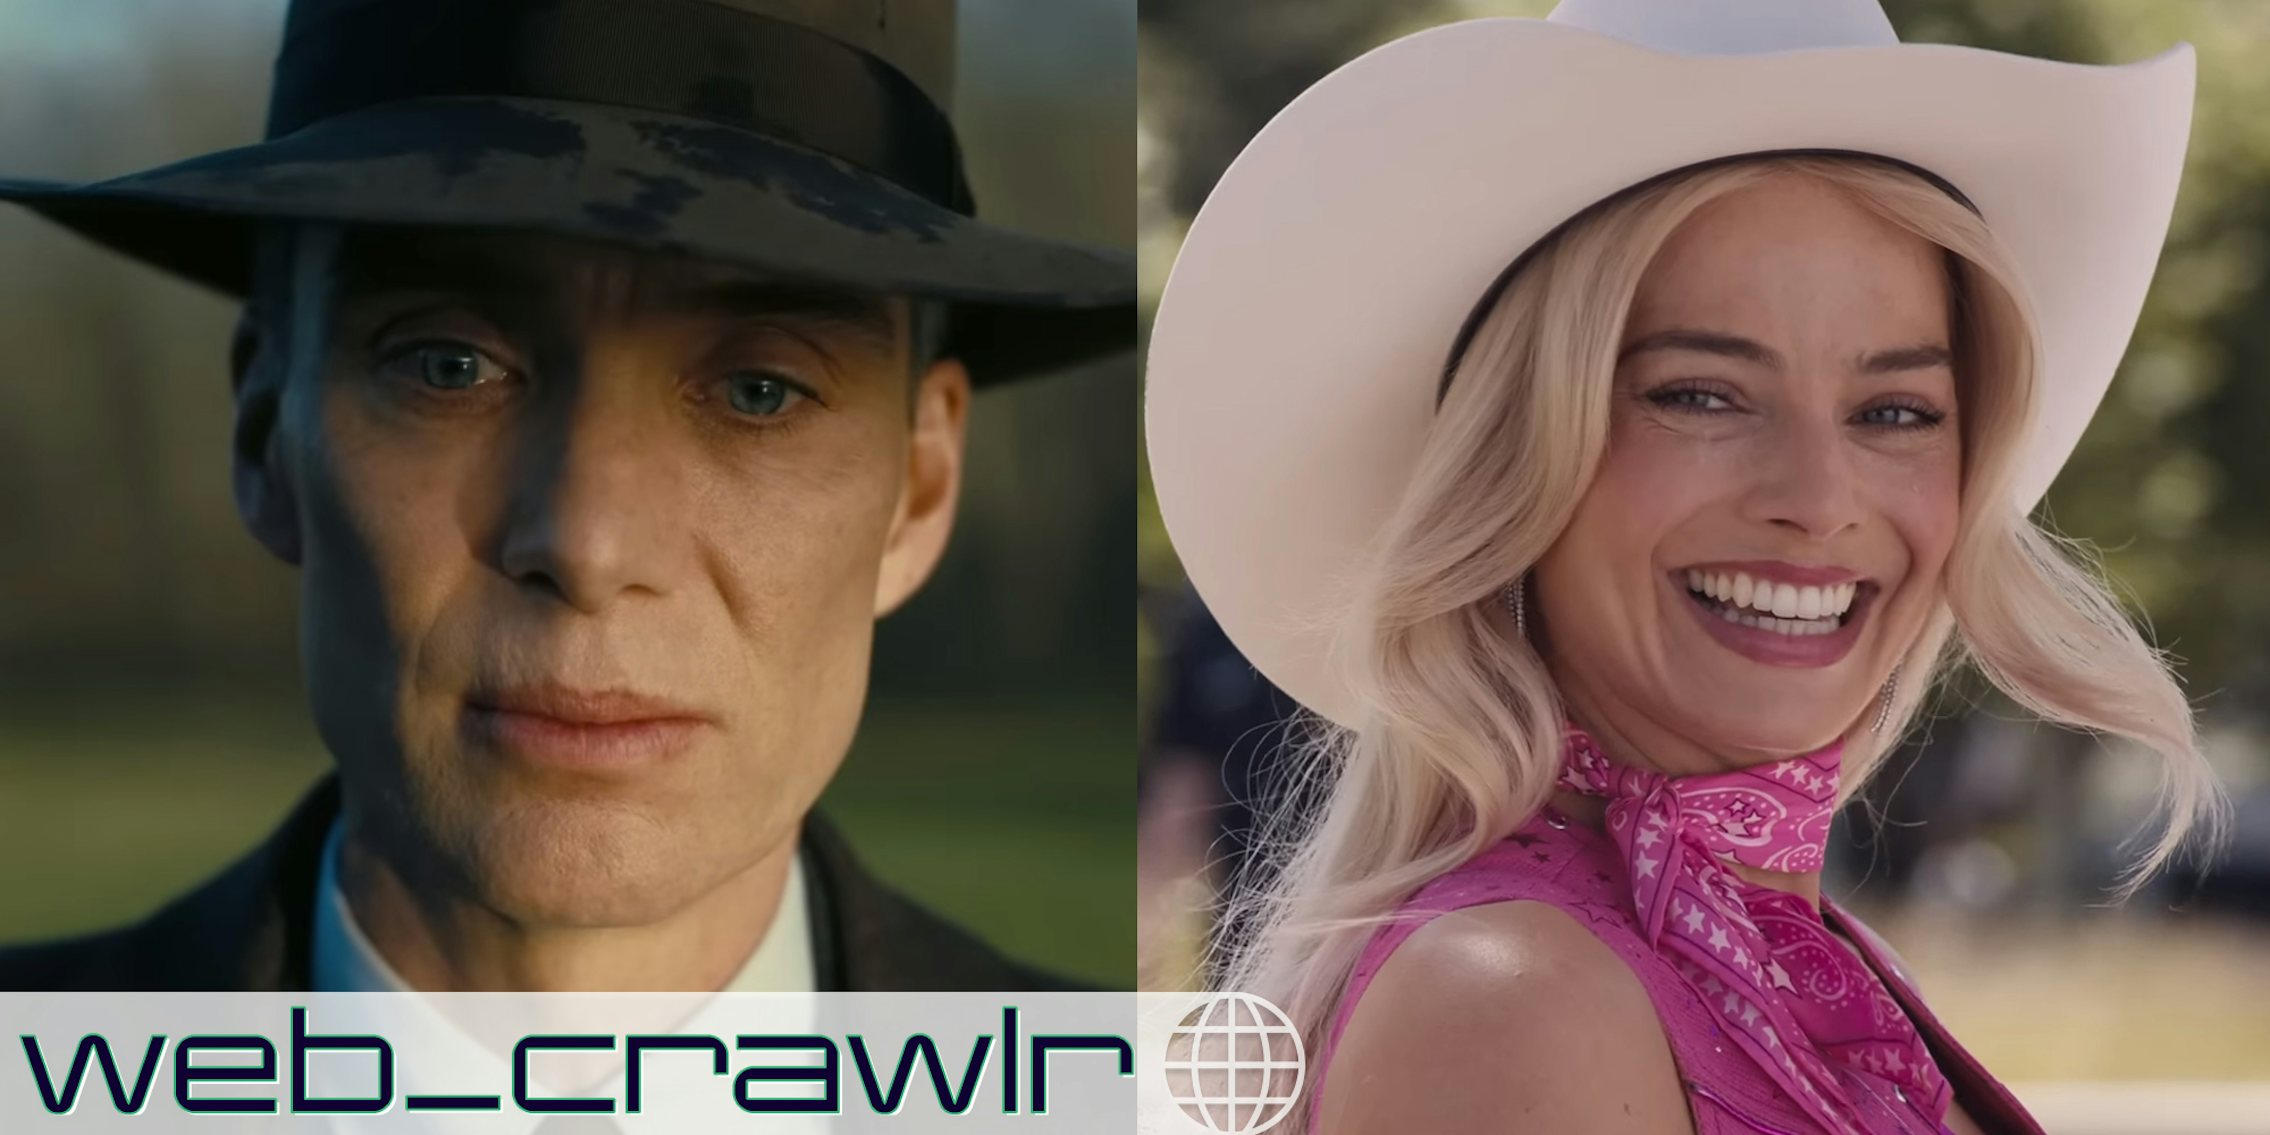 A still from 'Oppenheimer' and a still from 'Barbie.' The Daily Dot newsletter web_crawlr logo is in the bottom left corner.